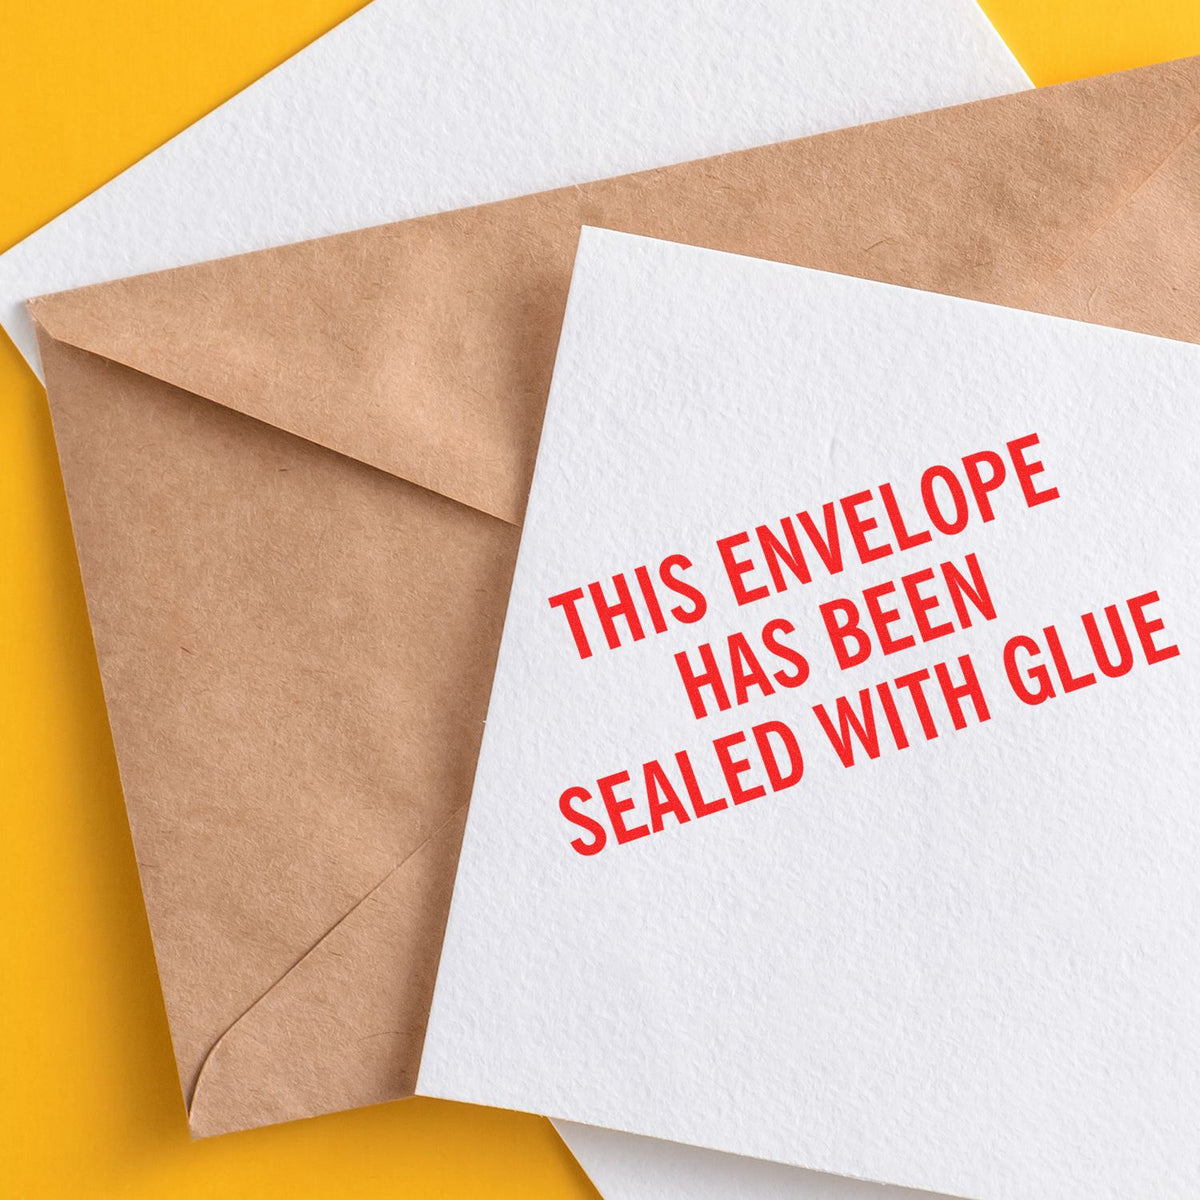 This Envelope Has Been Sealed Rubber Stamp In Use Photo